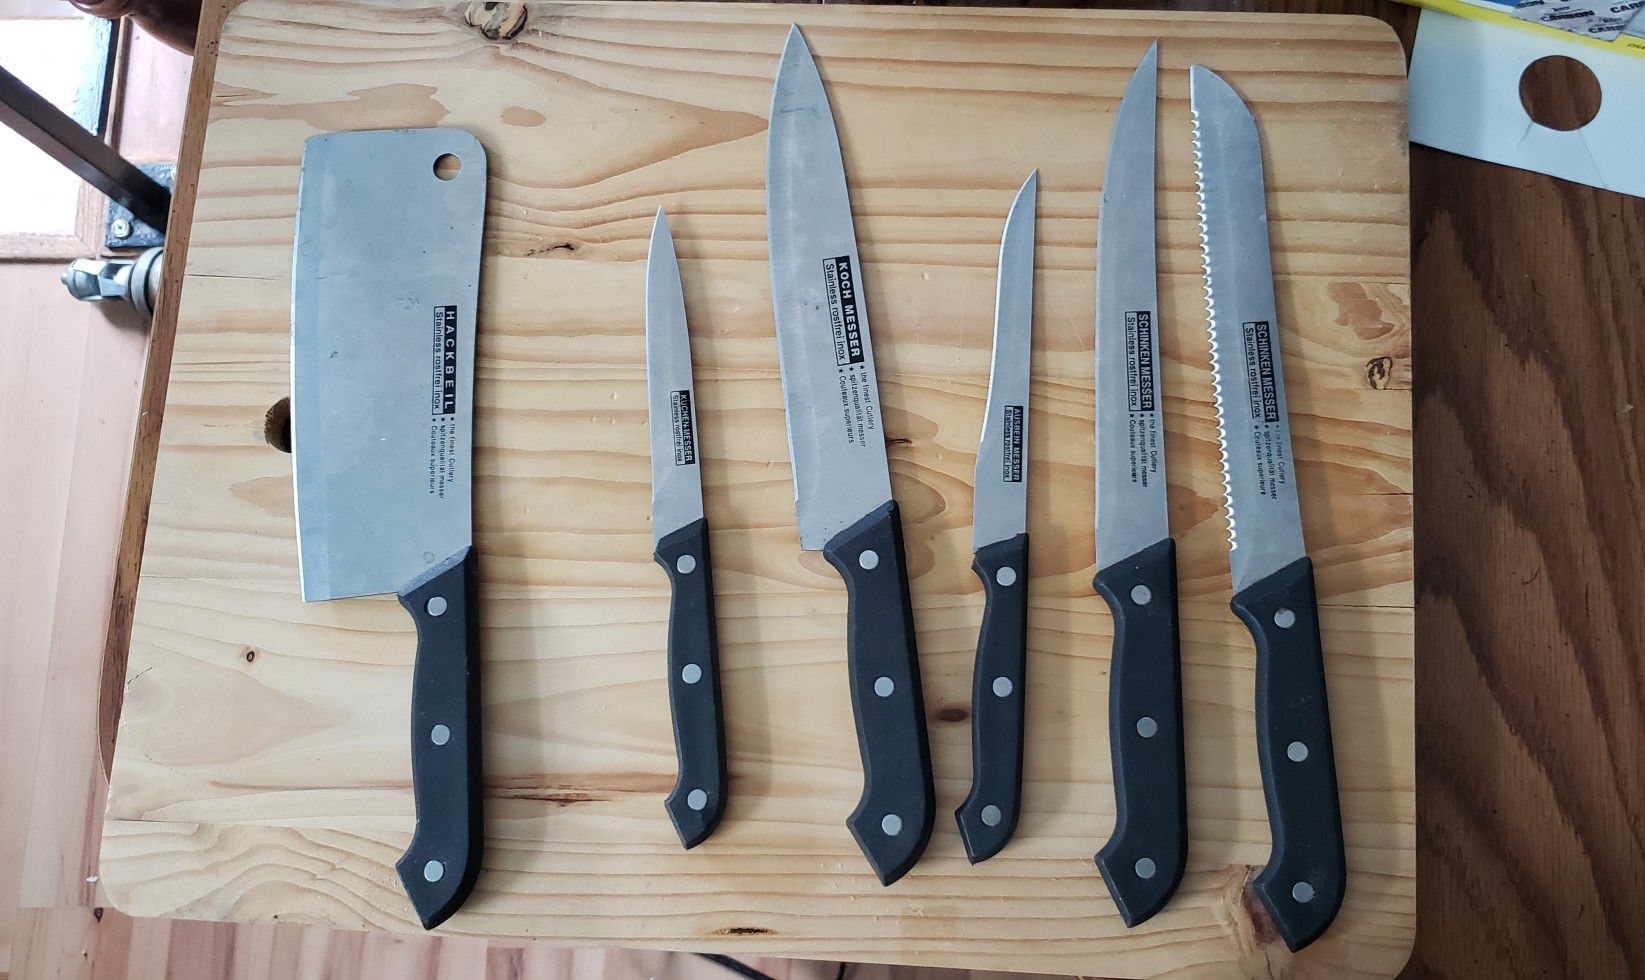 Ginsu Stainless Steel Knife Set $10 for Sale in Sterling, VA - OfferUp